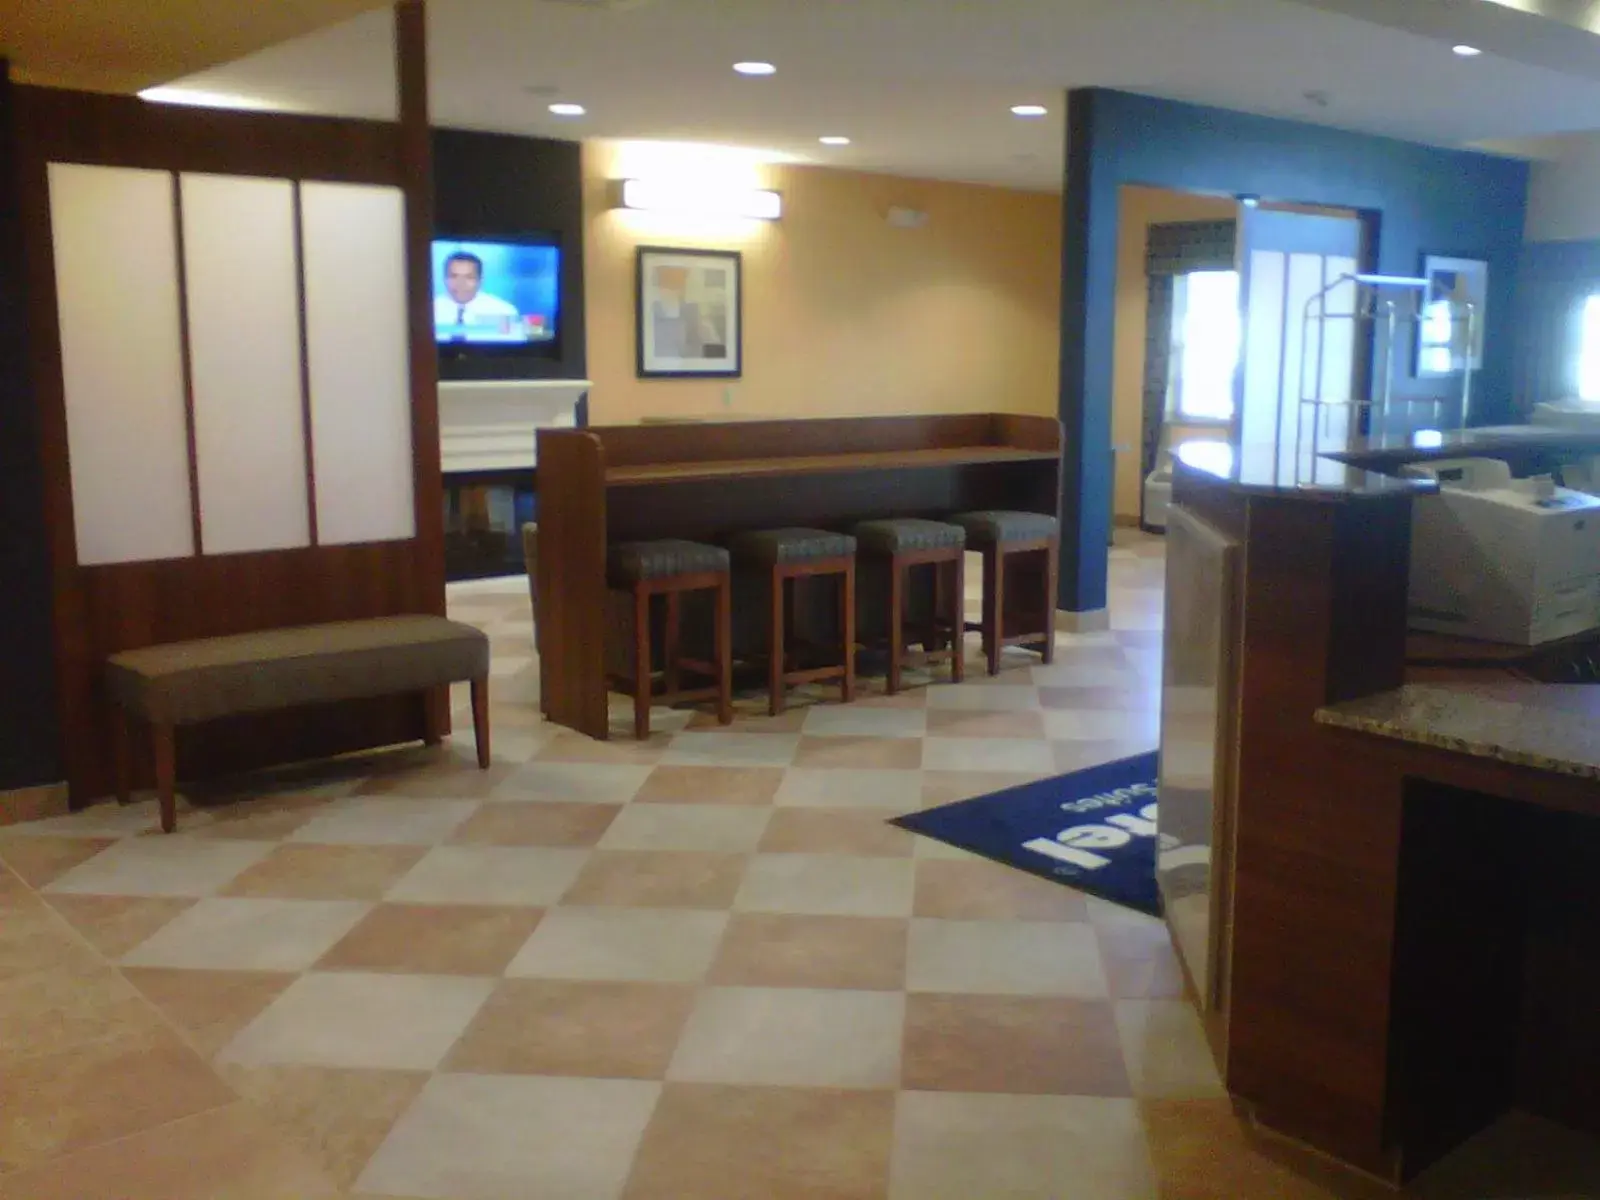 Lobby or reception in Microtel Inn & Suites Chili/Rochester